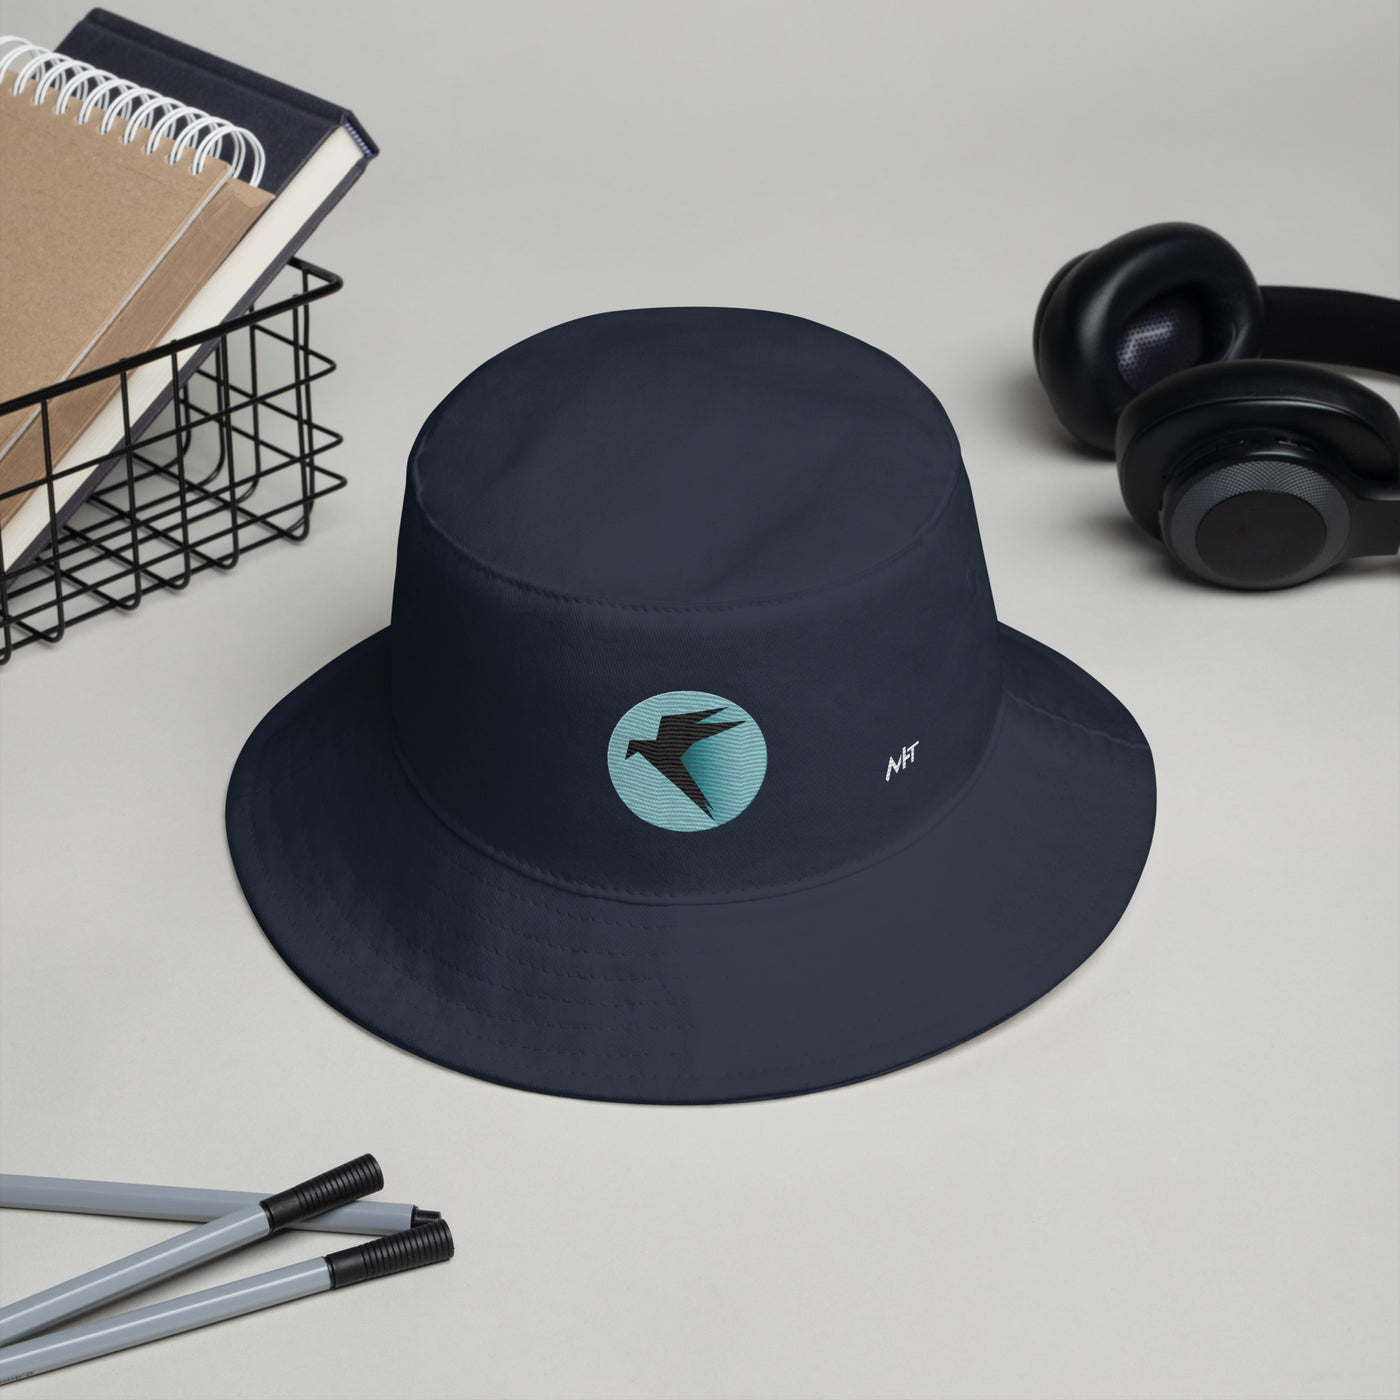 Parrot OS - The operating system for Hackers - Bucket Hat